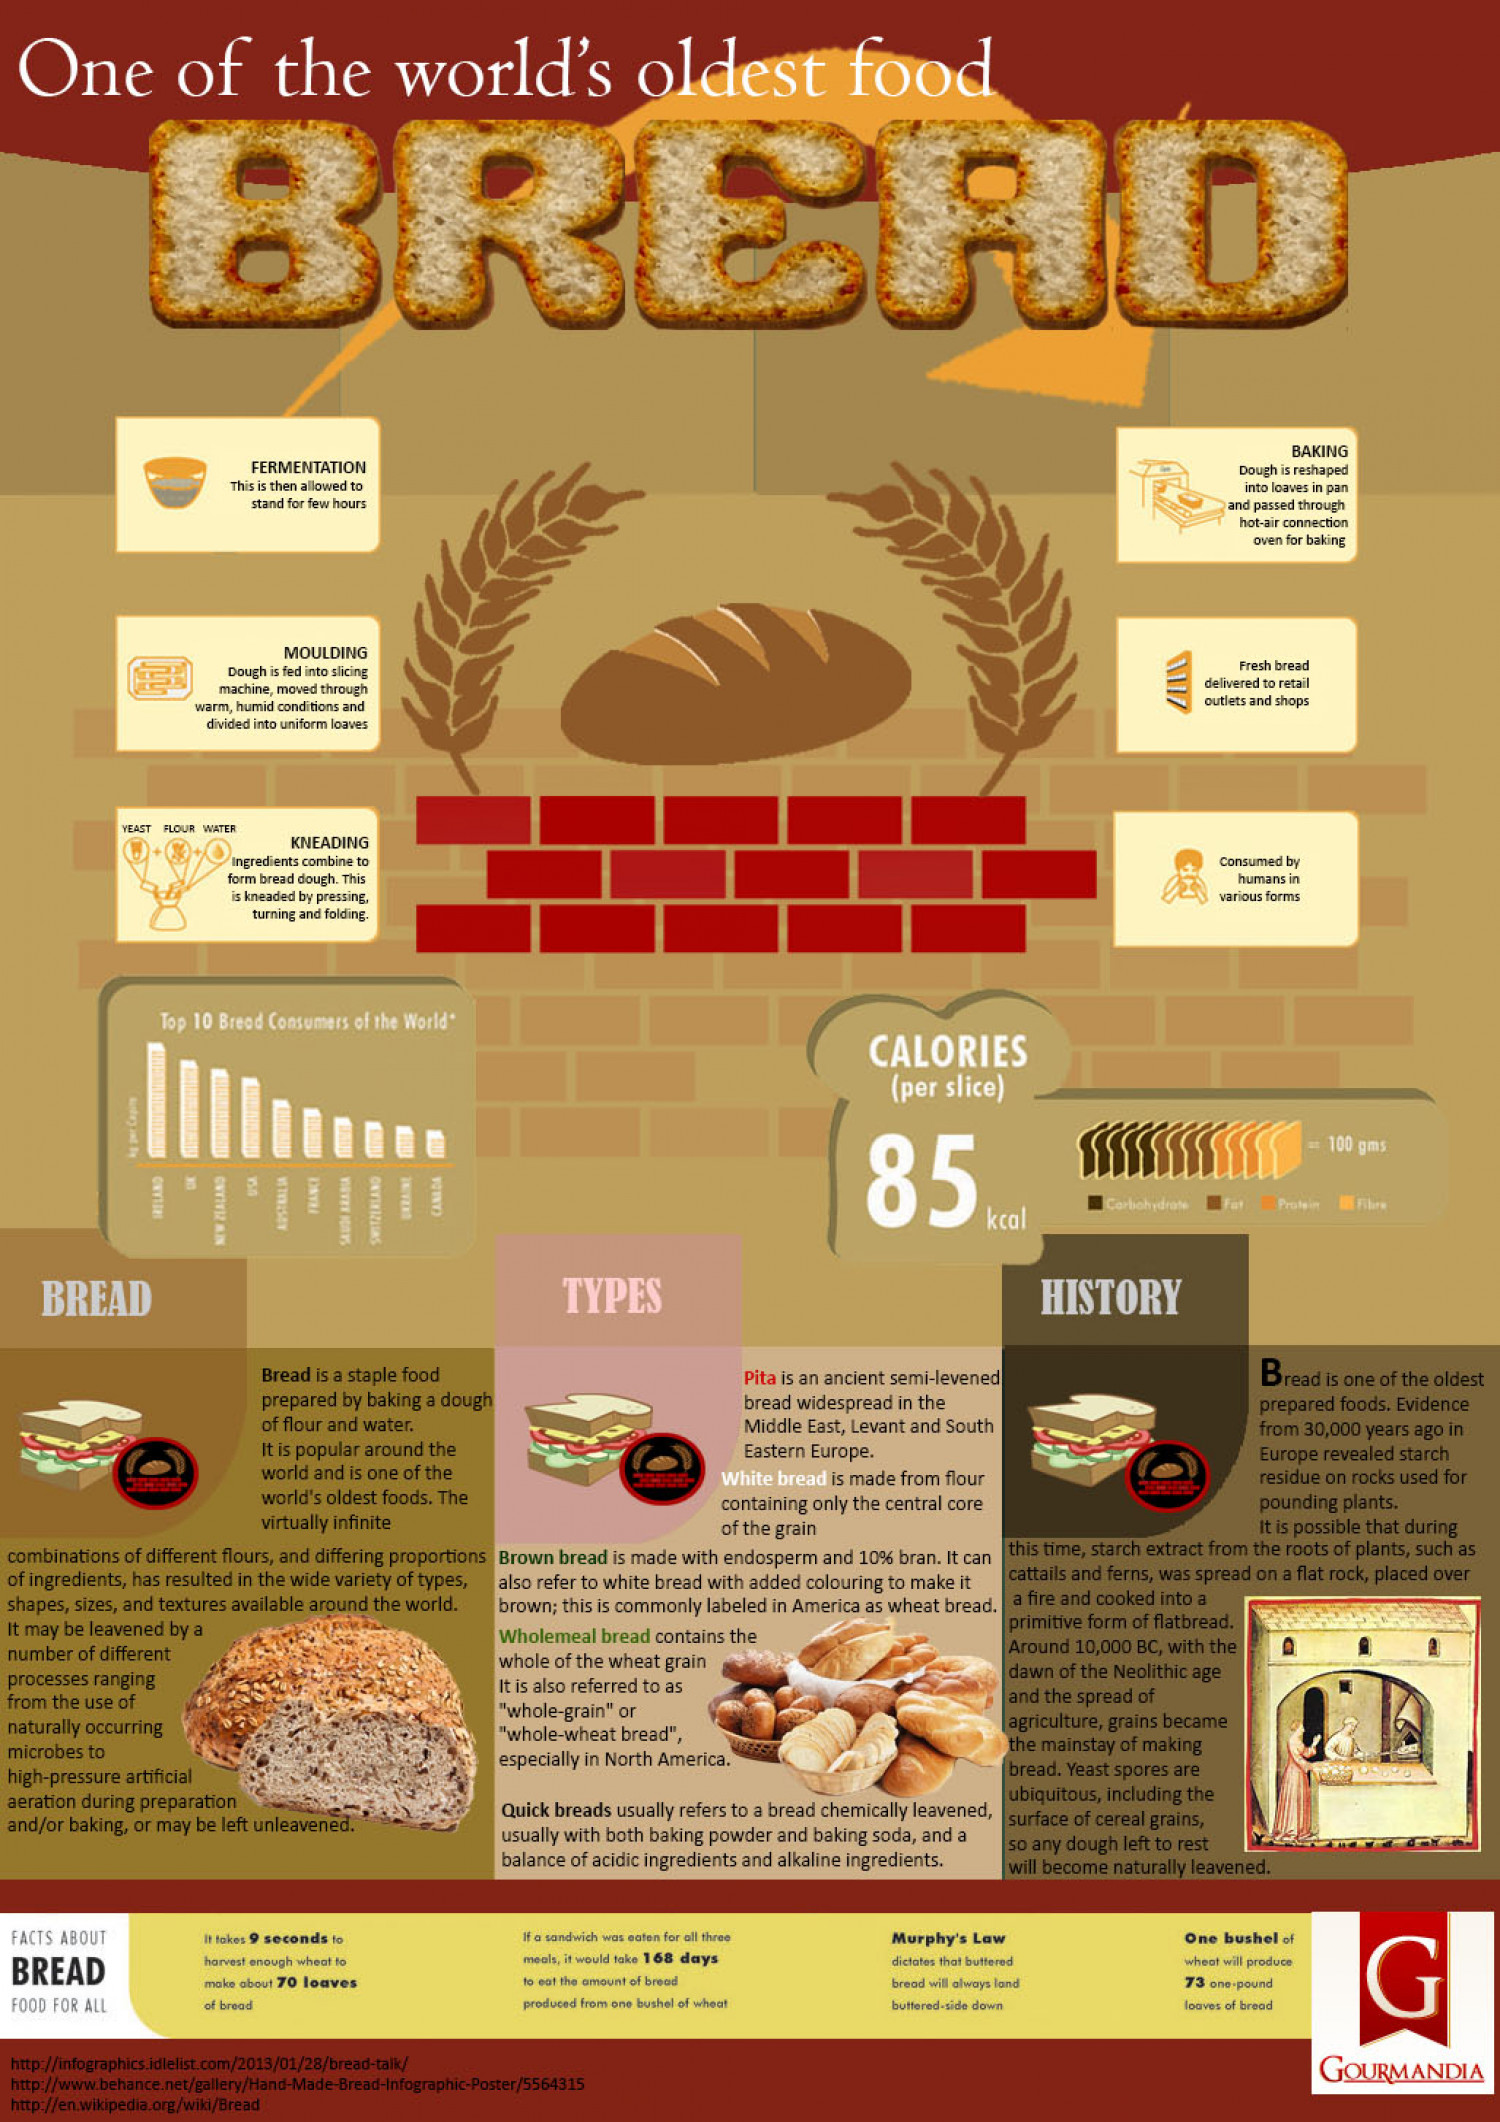 Bread - One of World's Oldest Food